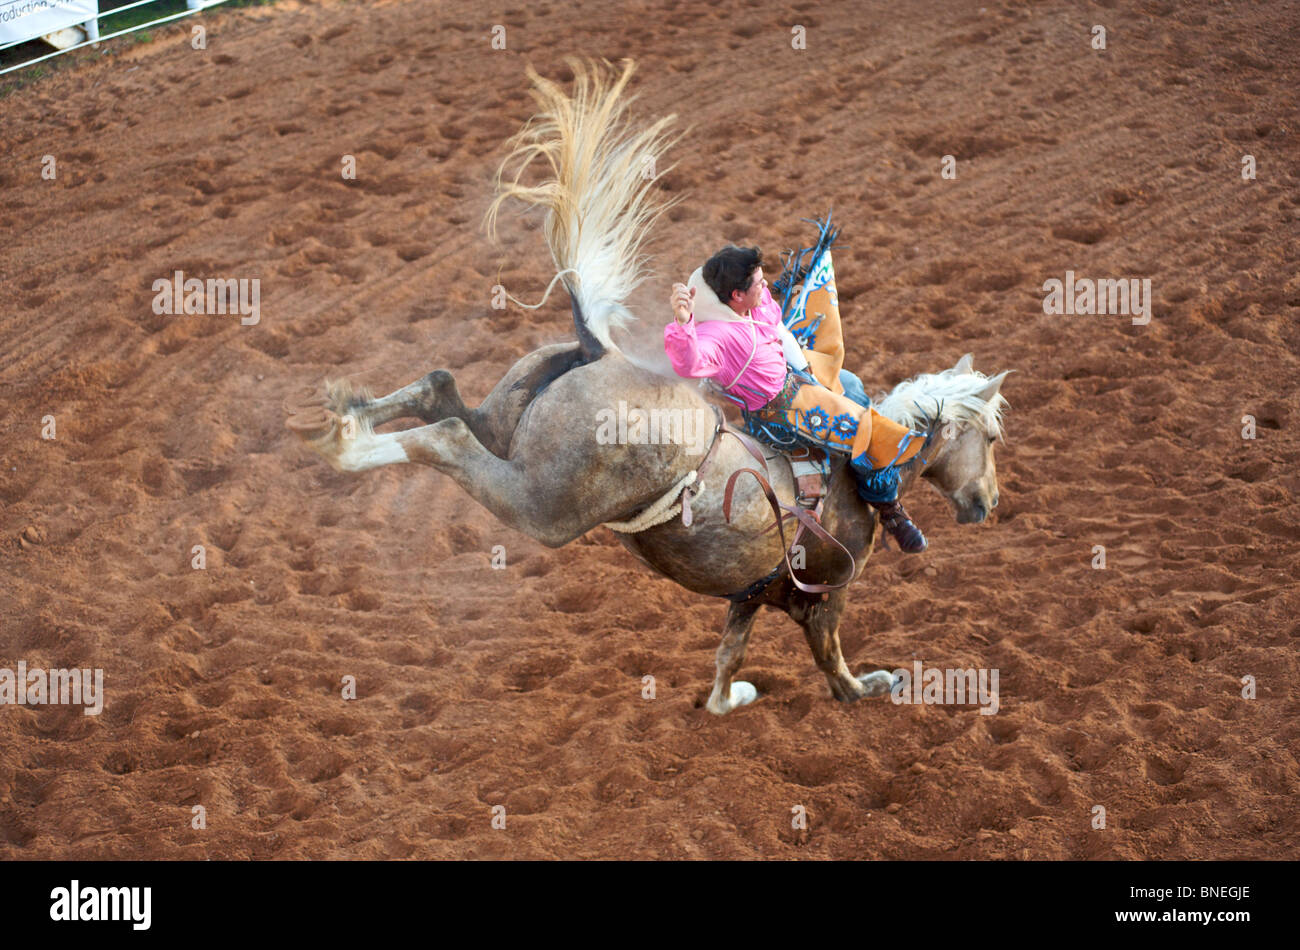 Horse trying to throw rodeo cowboy member of PRCA from its back in Smalltown Texas Bridgeport Stock Photo